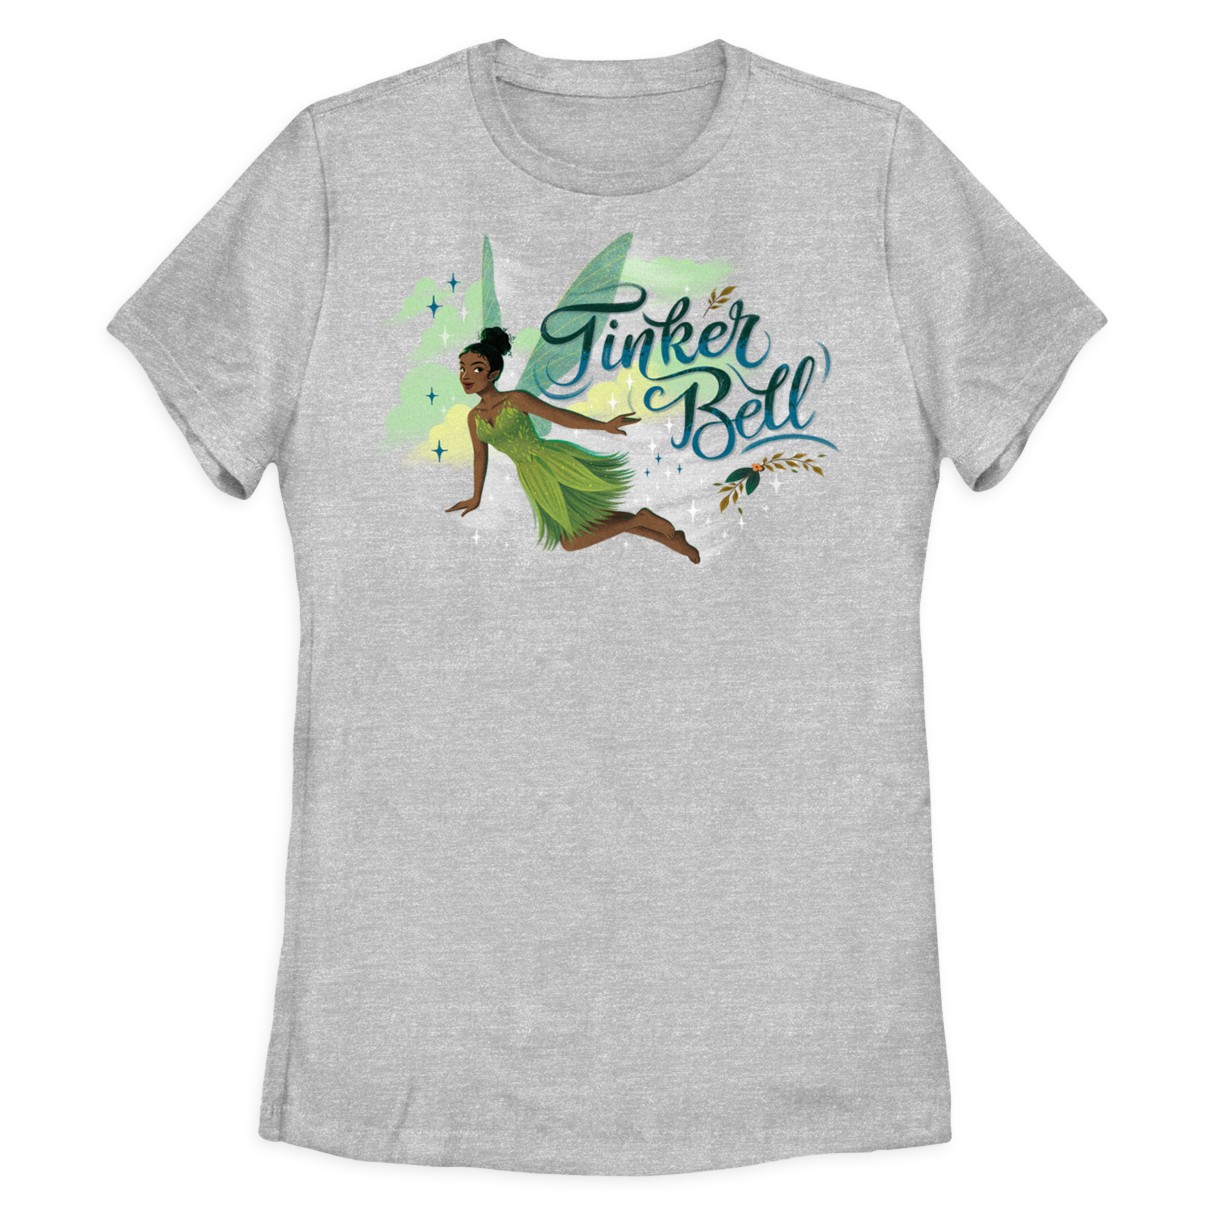 Tinker Bell T-Shirt for Women – Peter Pan & Wendy – Live Action Film